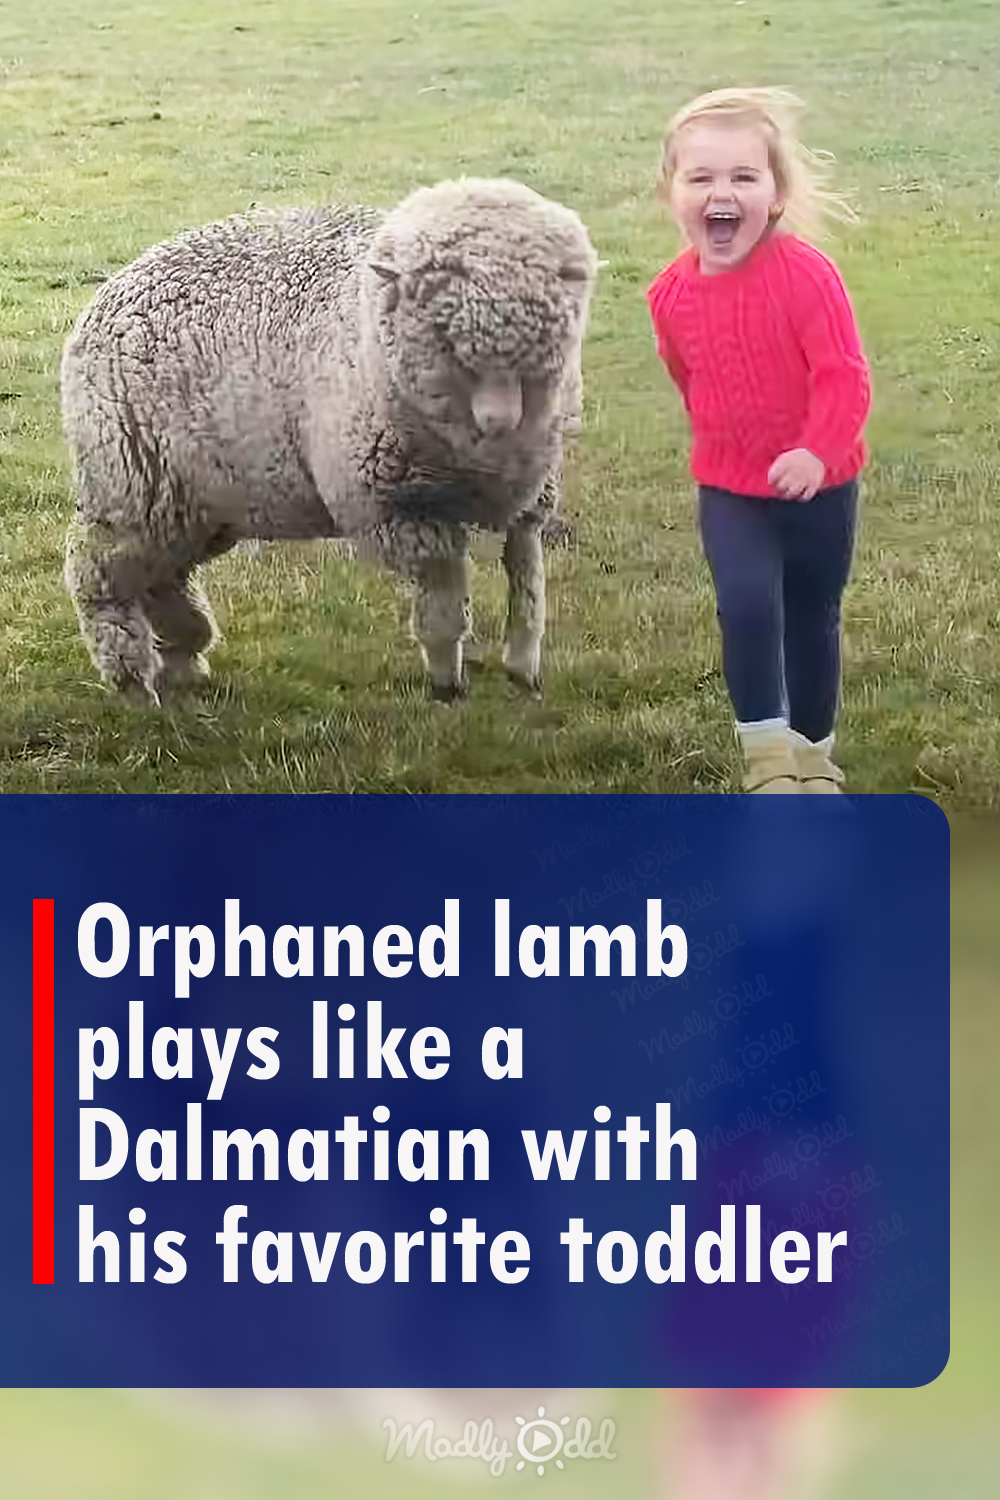 Orphaned lamb plays like a Dog with his favorite toddler